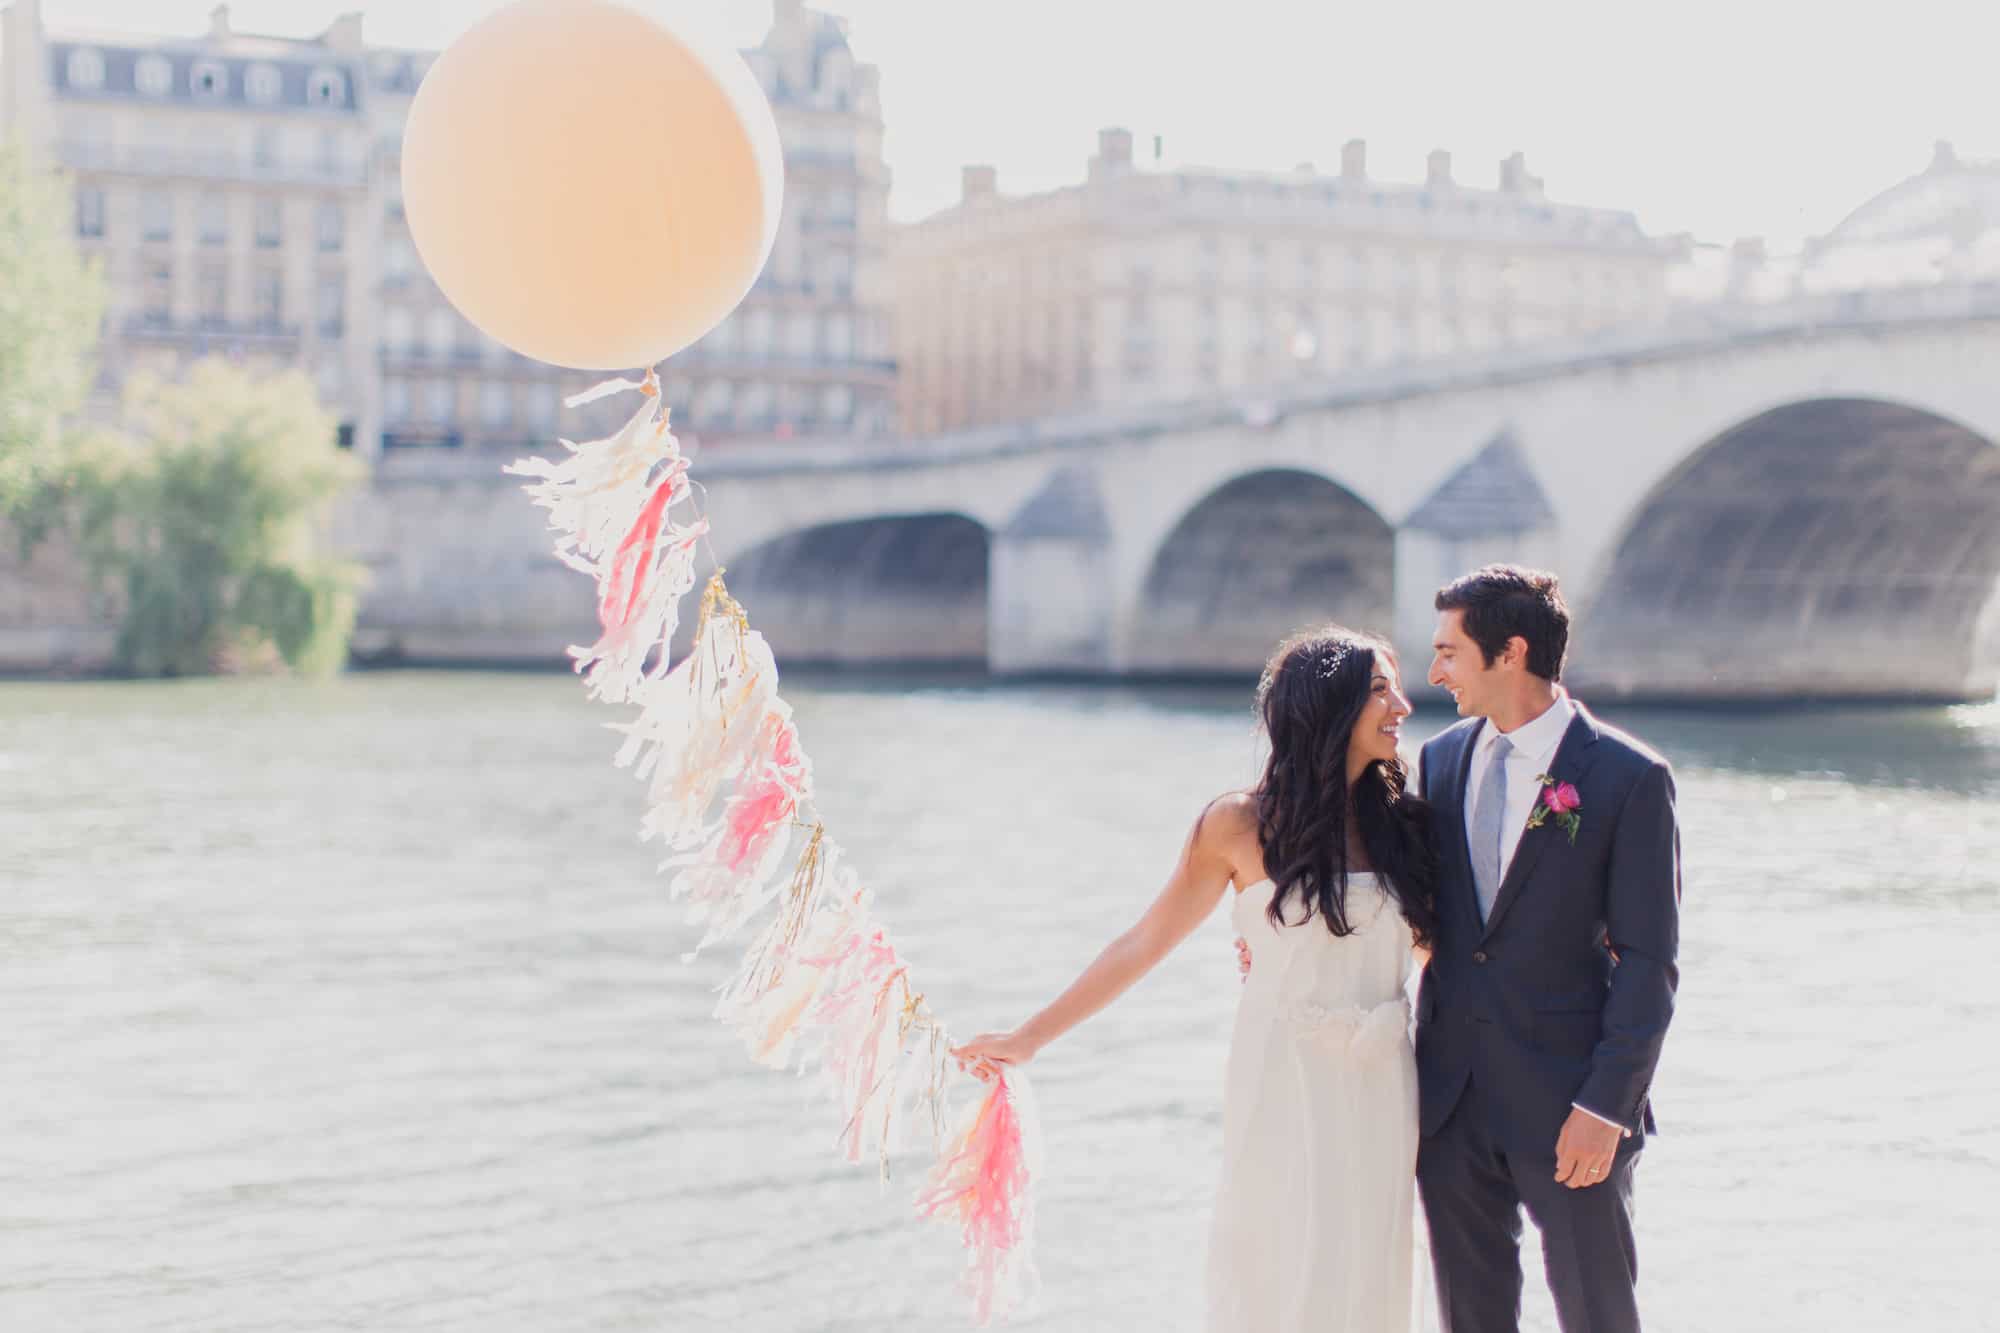 Paris' Instagrammable spots are aplenty, including the River Seine for this newly married couple holding a balloon.